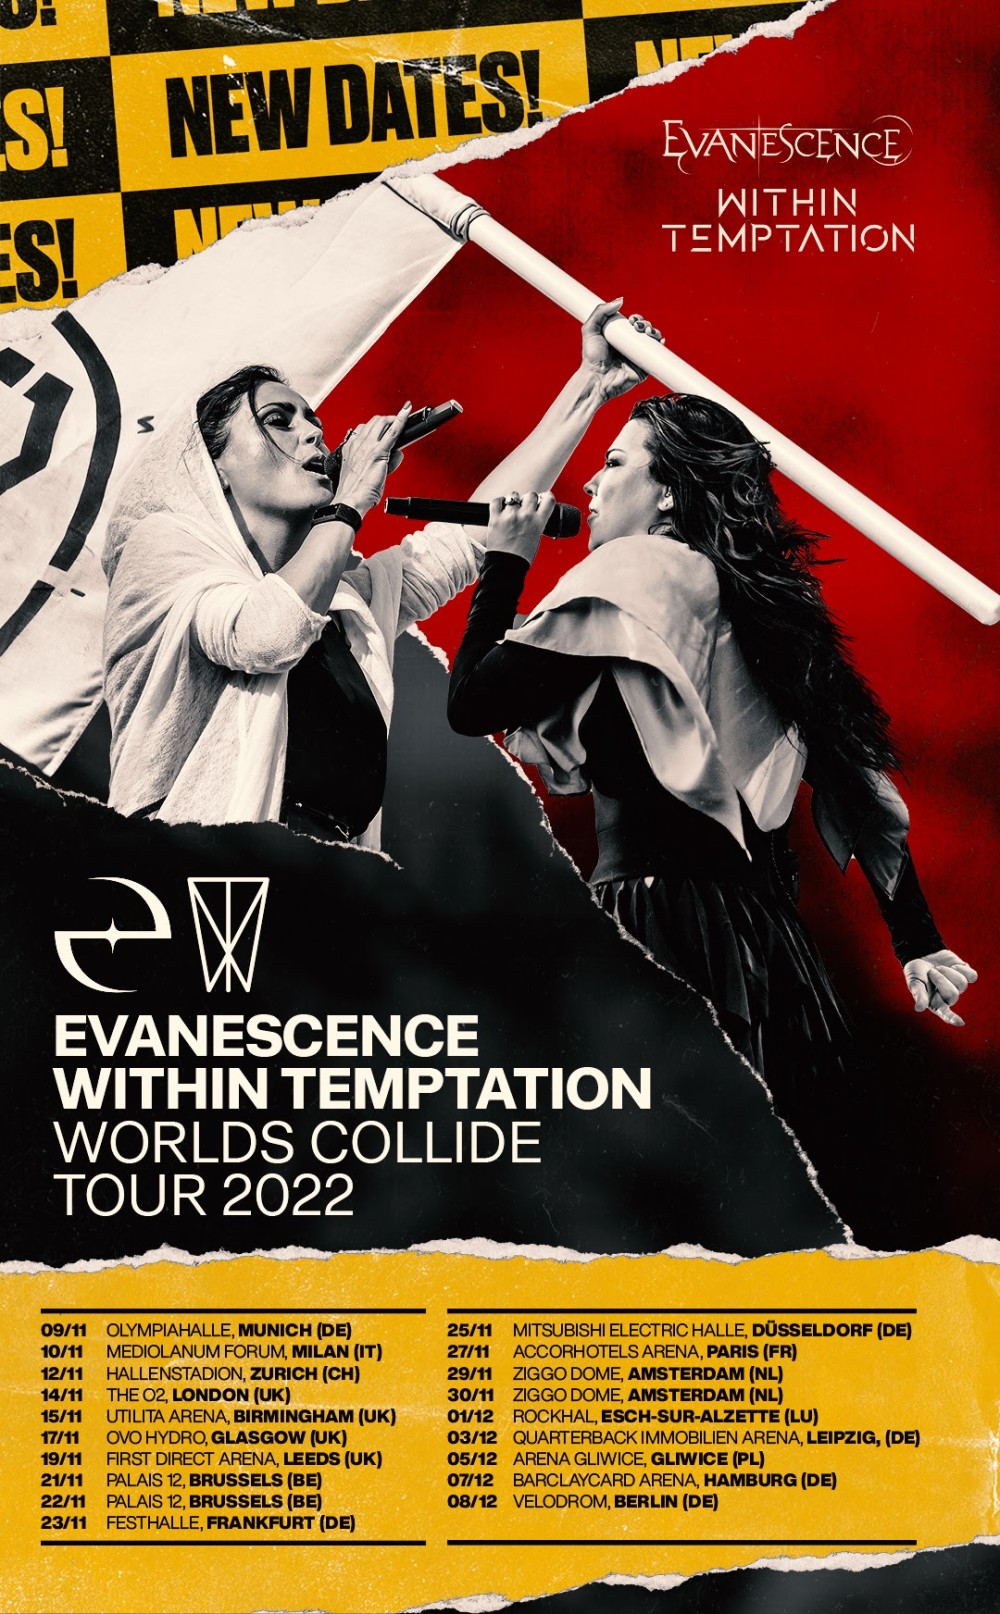 Within Temptation and Evanescence tour